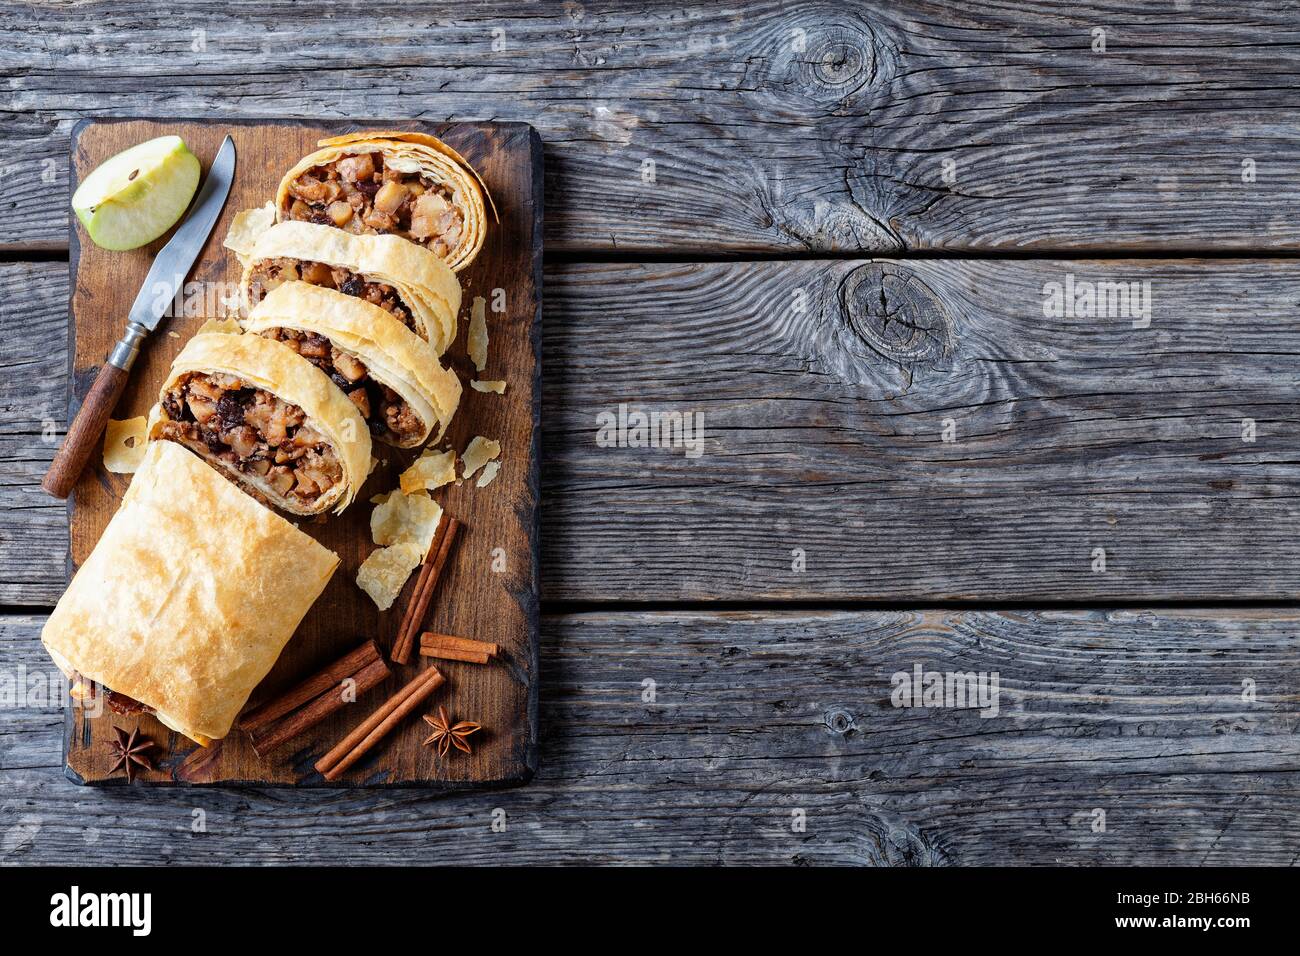 Crispy Baked Austrian Dessert Apple Strudel Of Phyllo Dough With Caramelized Apples Nuts Cinnamon Raisins Served On A Wooden Cutting Board With St Stock Photo Alamy